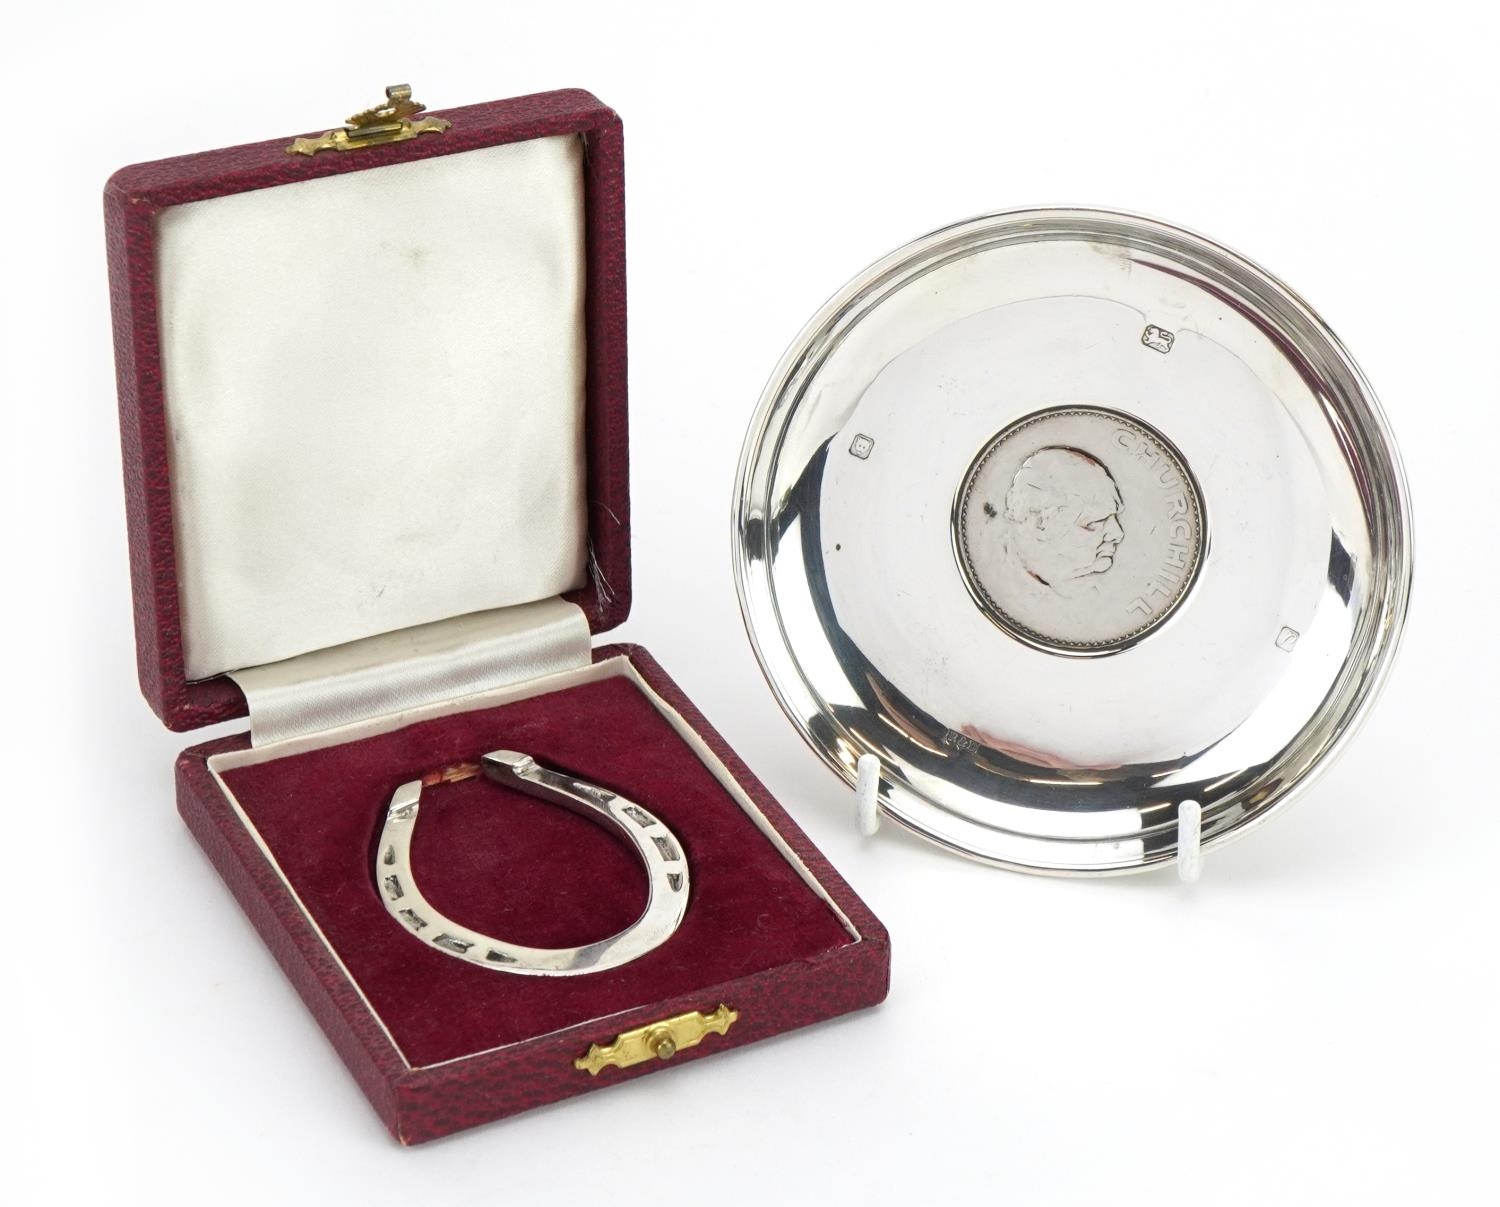 Circular silver commemorative dish set with a 1965 Churchill crown and a silver horseshoe napkin